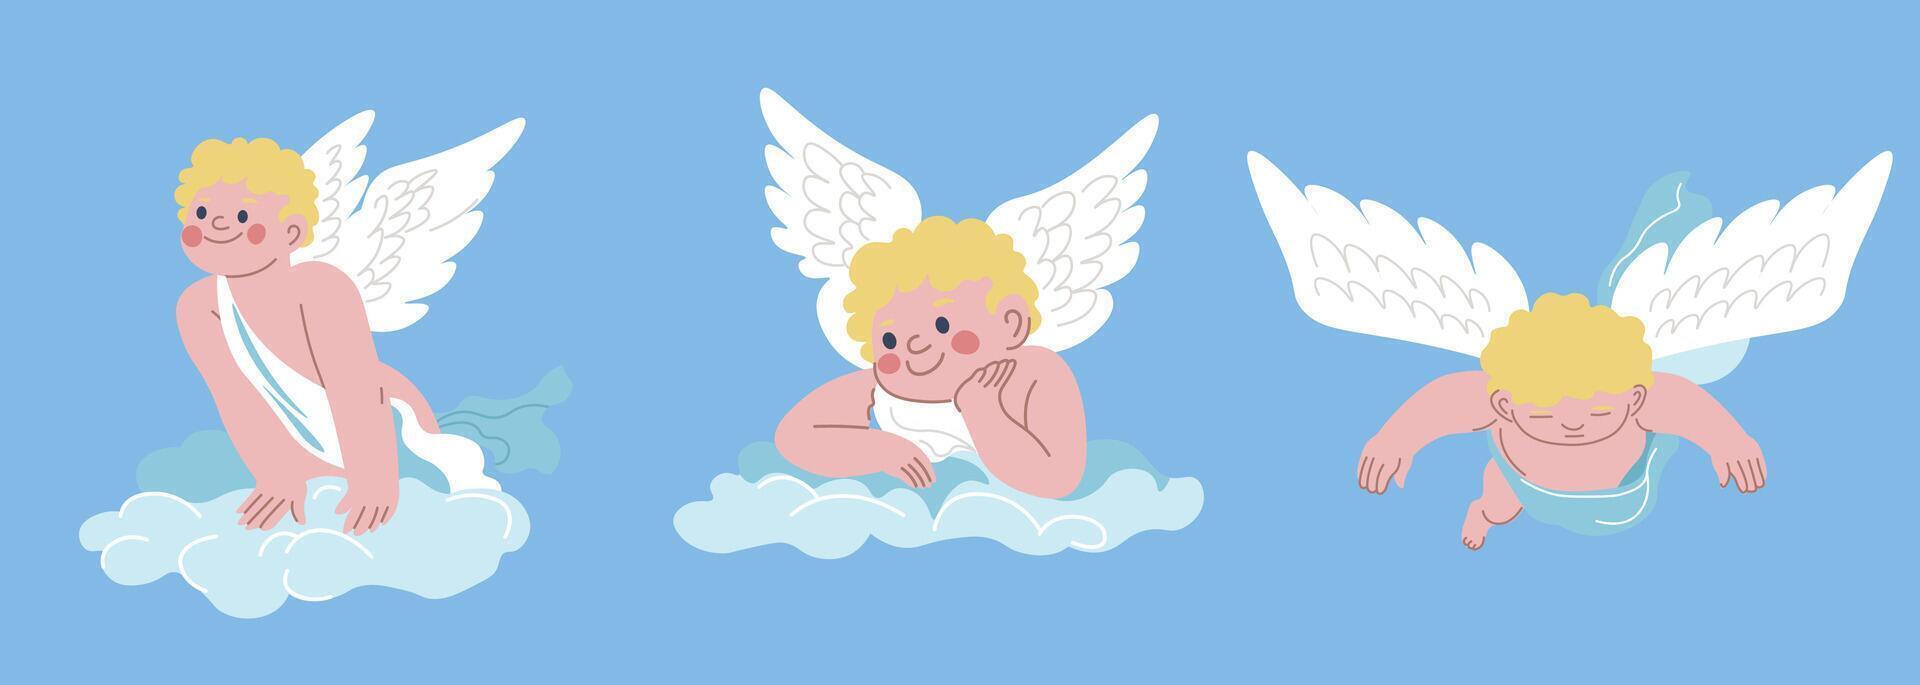 Cupids leaned on clouds and flying in sky vector